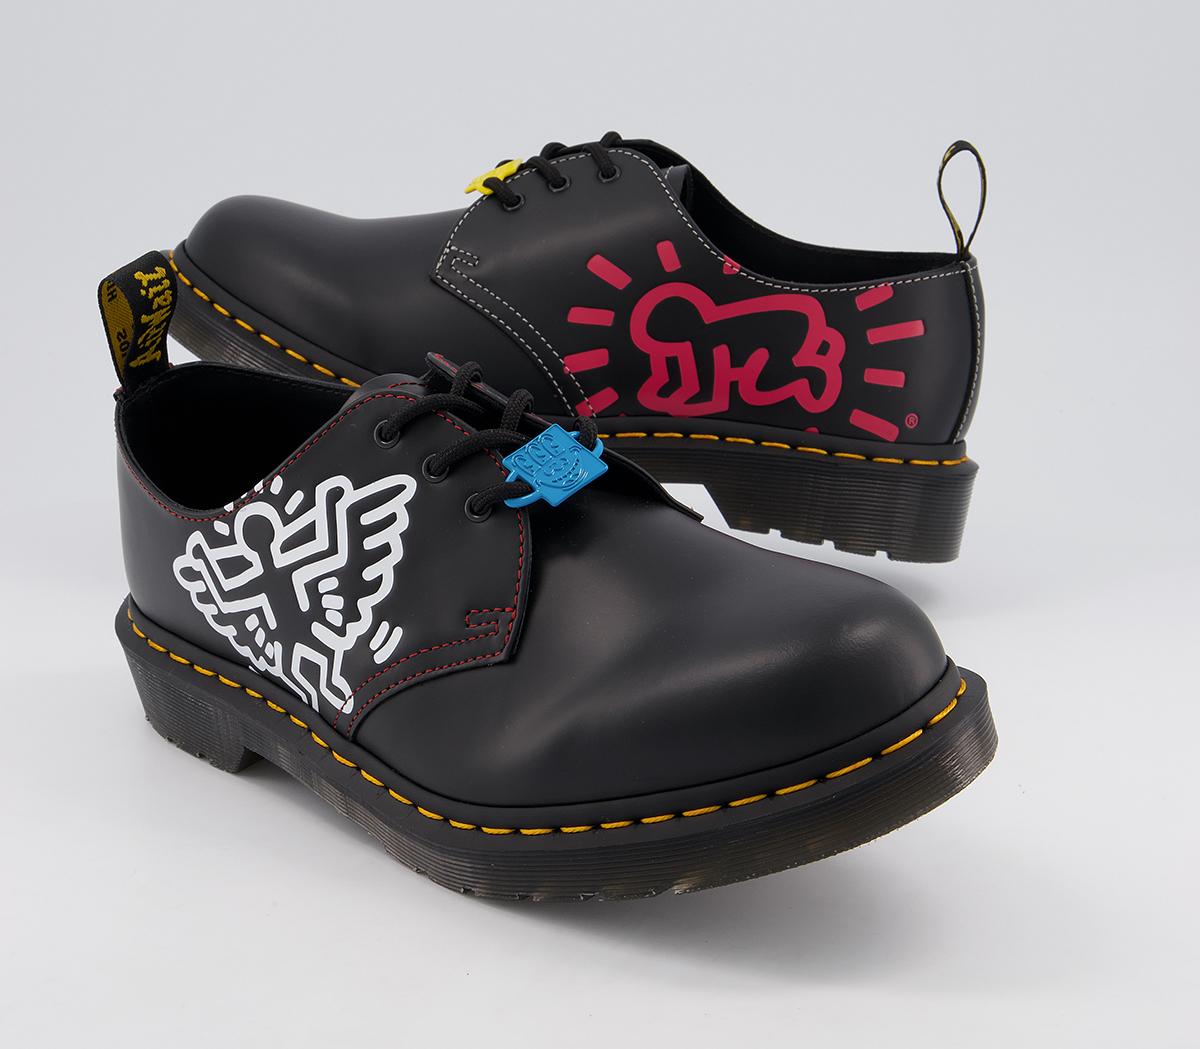 Dr. Martens Keith Haring 1461 3 Eye Shoes W Black - Womens